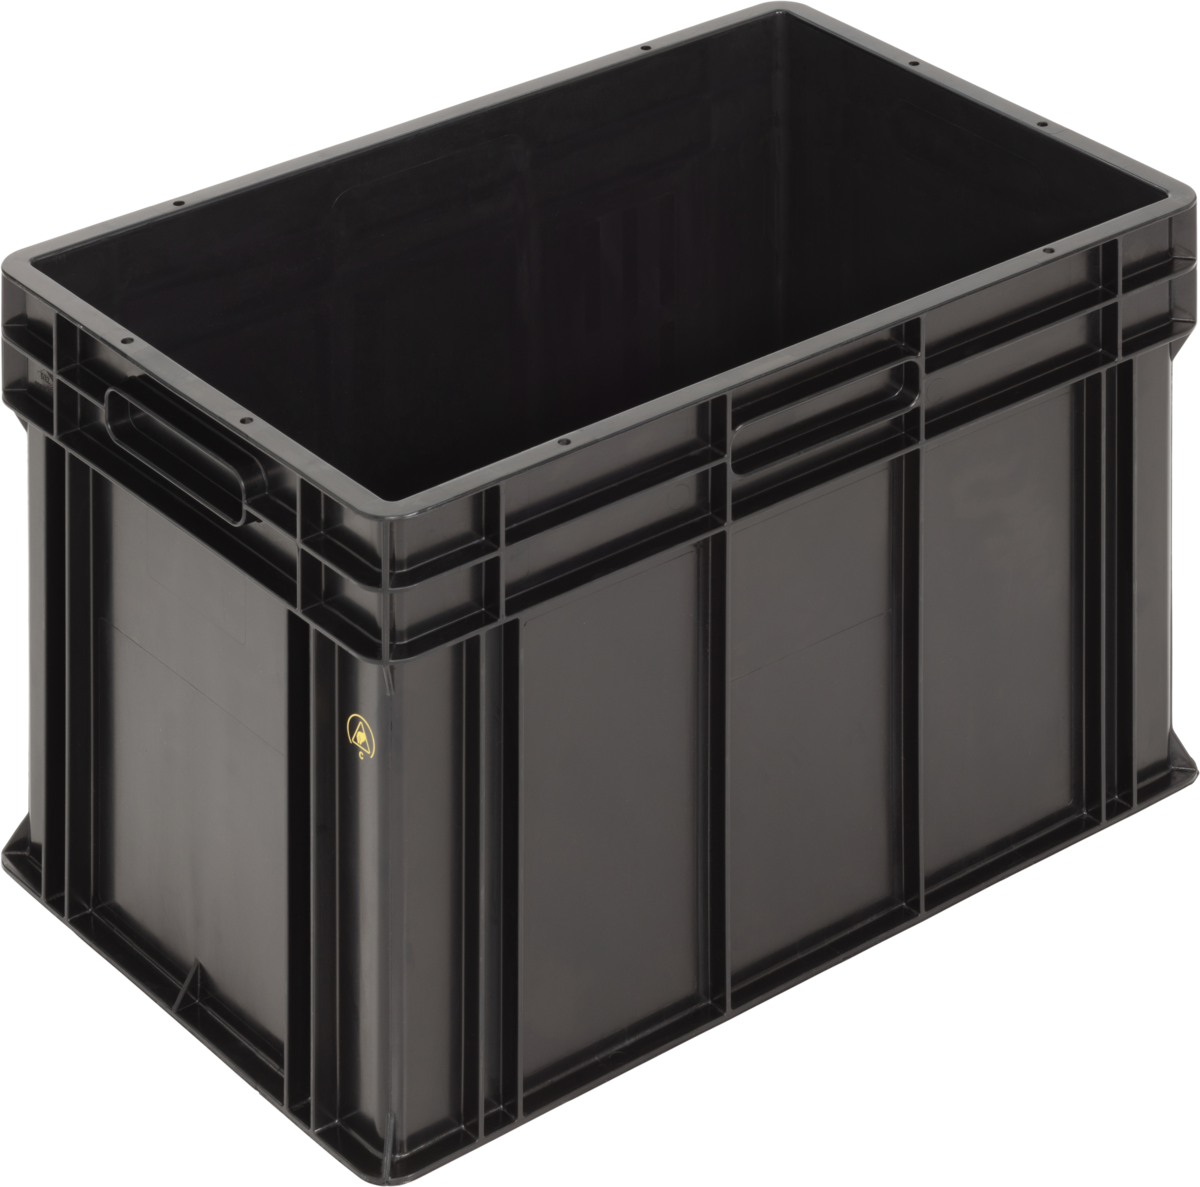 Anti-Static-ESD-Antistatic-Safe-SGL-Norm-Stacking-Bin-Containers-Ribbed-Base-626-Ref.-6440.626.992_0_600x400x415_01